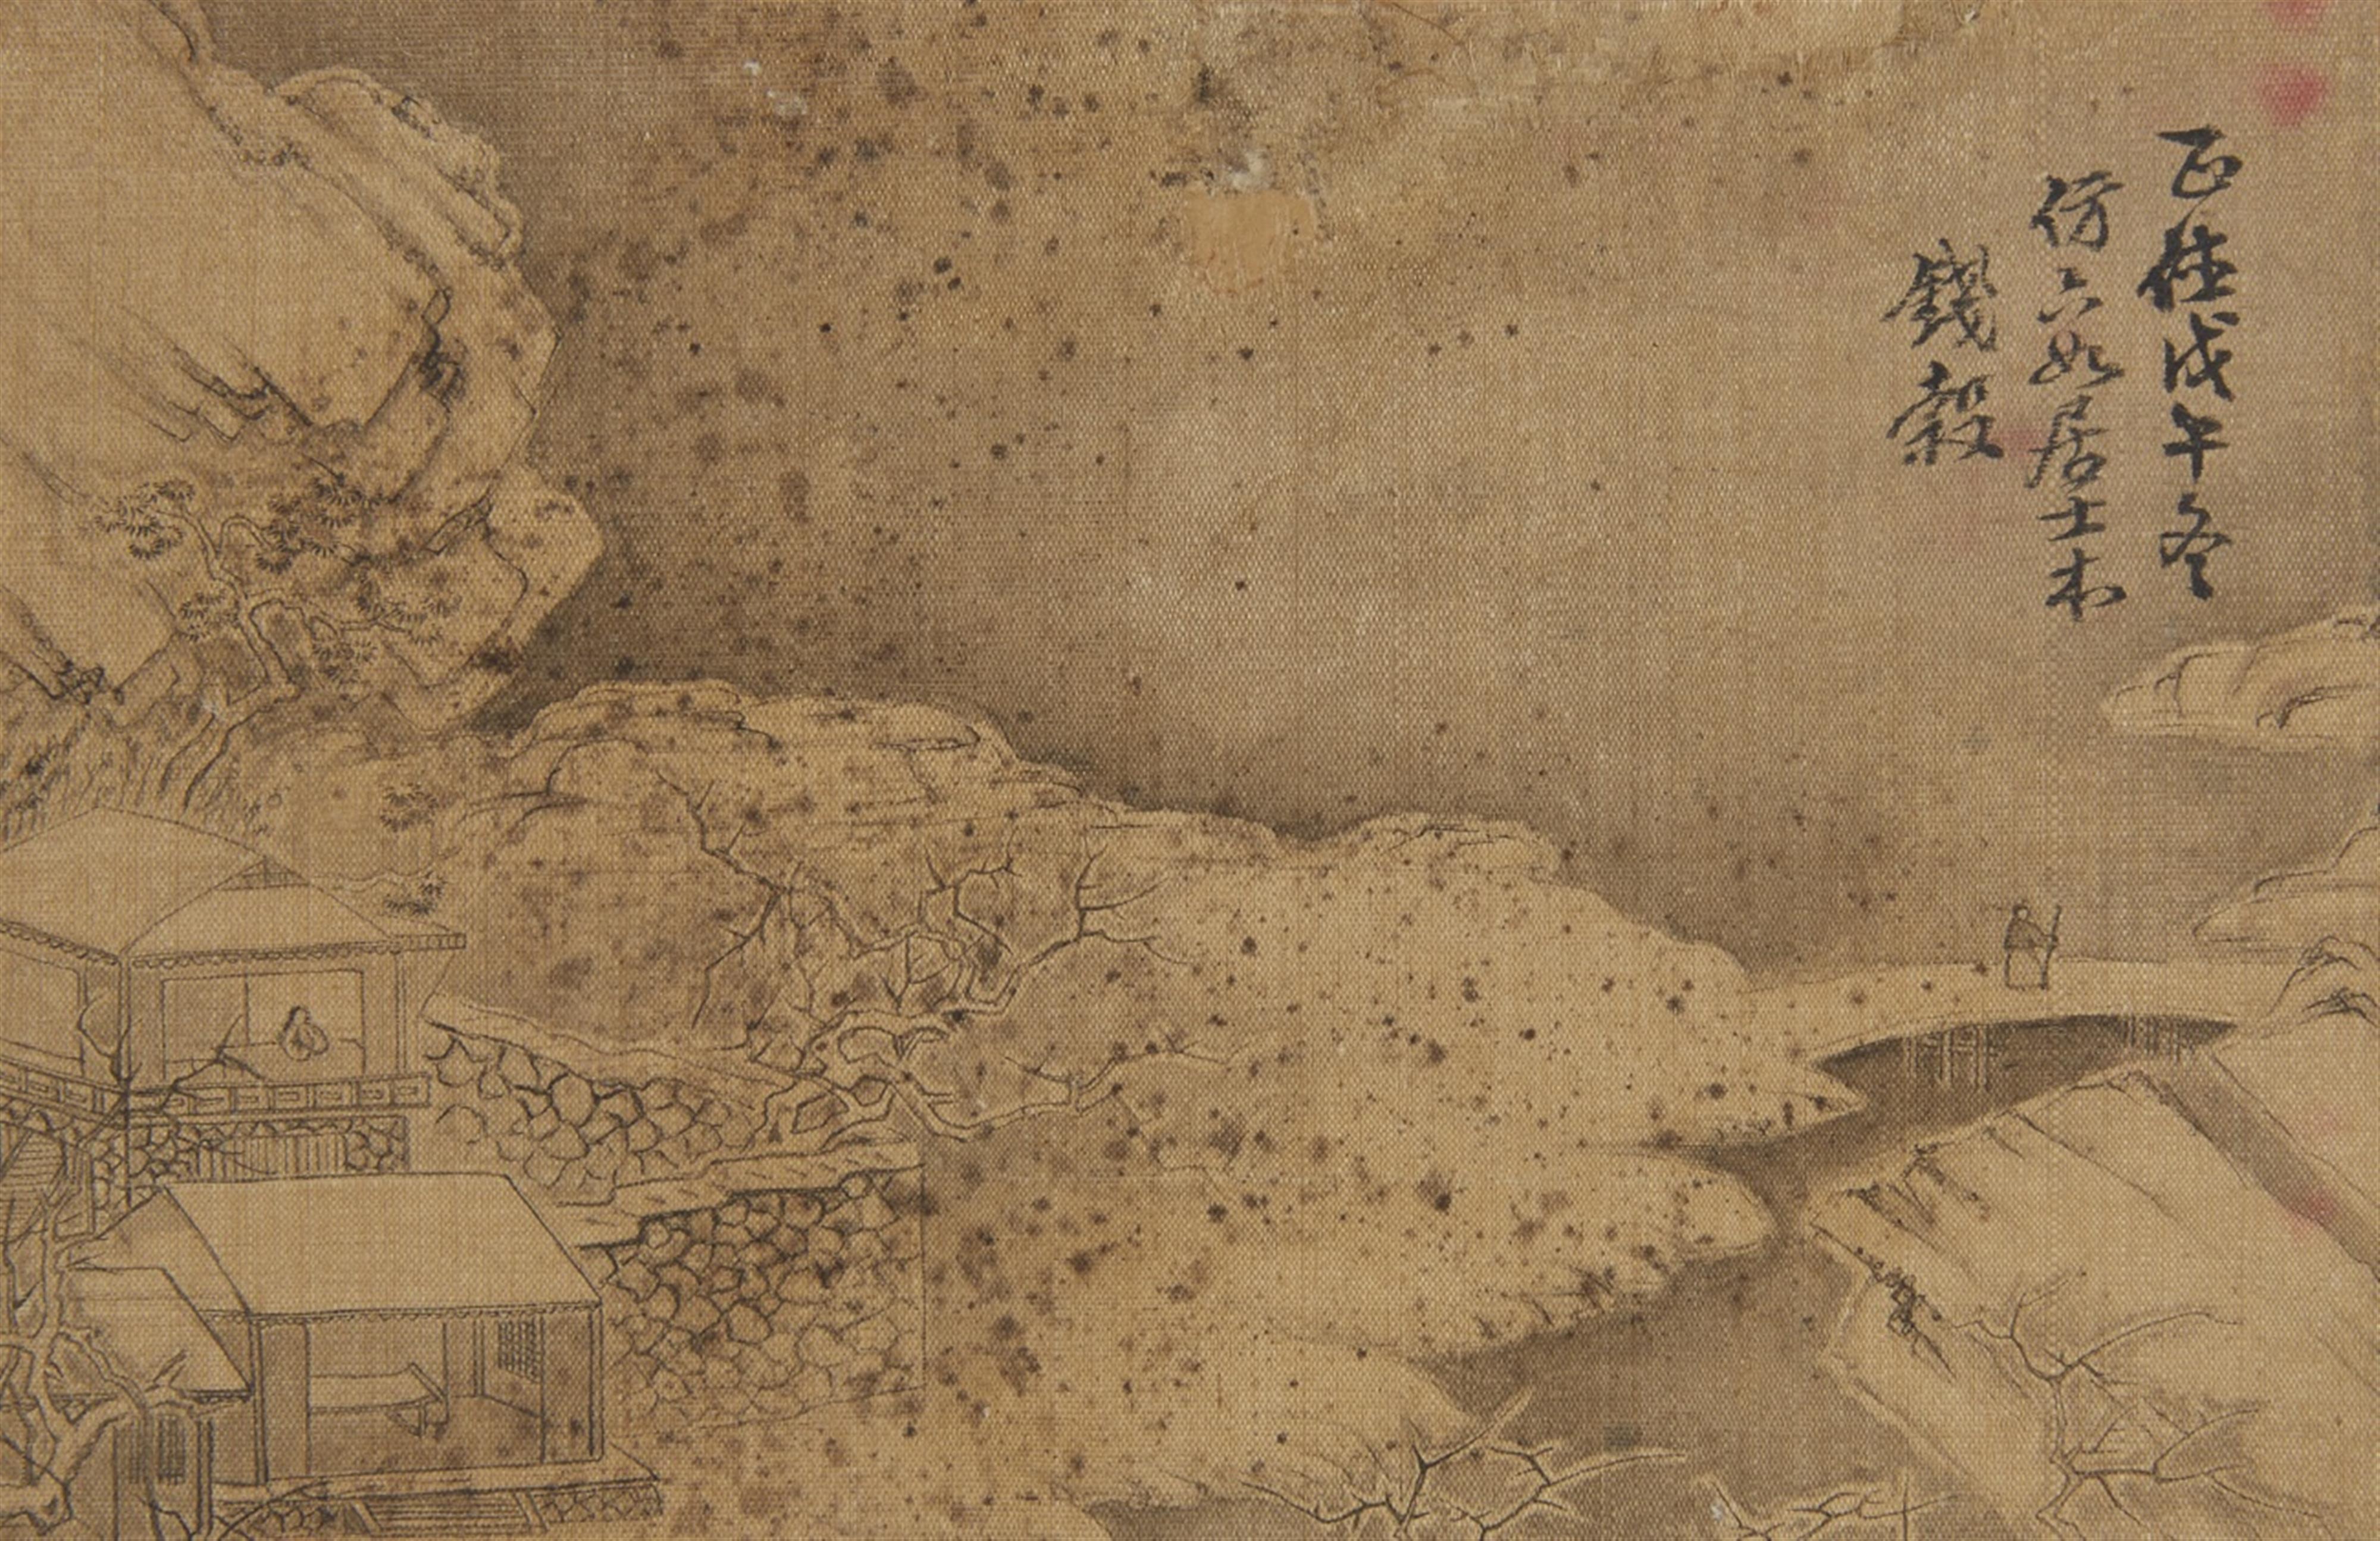 Qian Gu, in the manner of - An album titled "Ming Qian Gu shanshui ce" with six double-leaves, depicting landscapes in the manner of Qian Gu (1508-1578). Water damages. Cloth-covered covers. - image-7